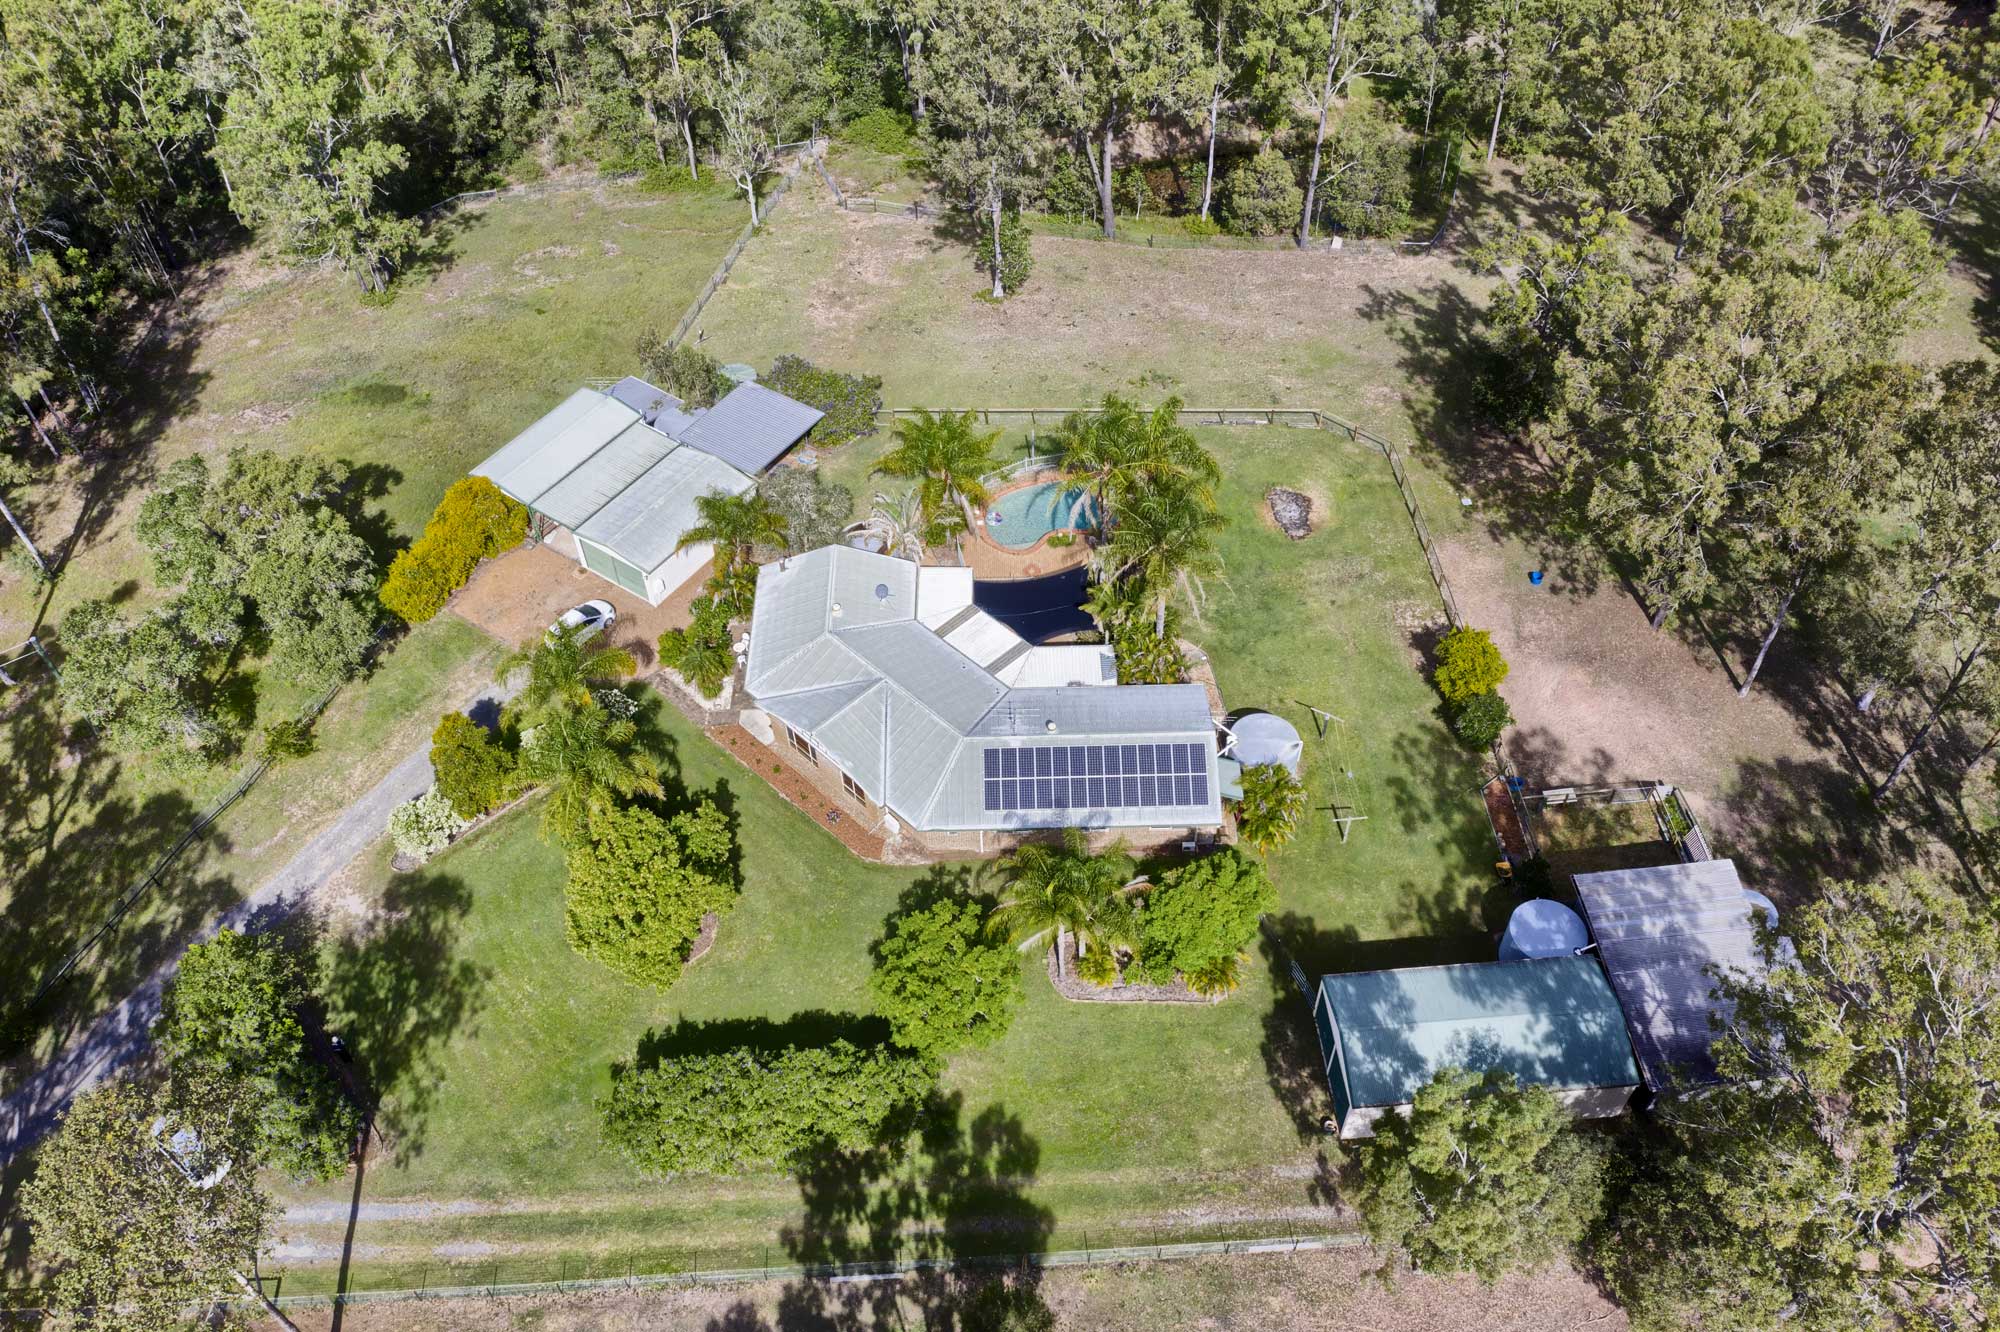 Drone photography at 33 Shergar Court Jimboomba for a real estate listing